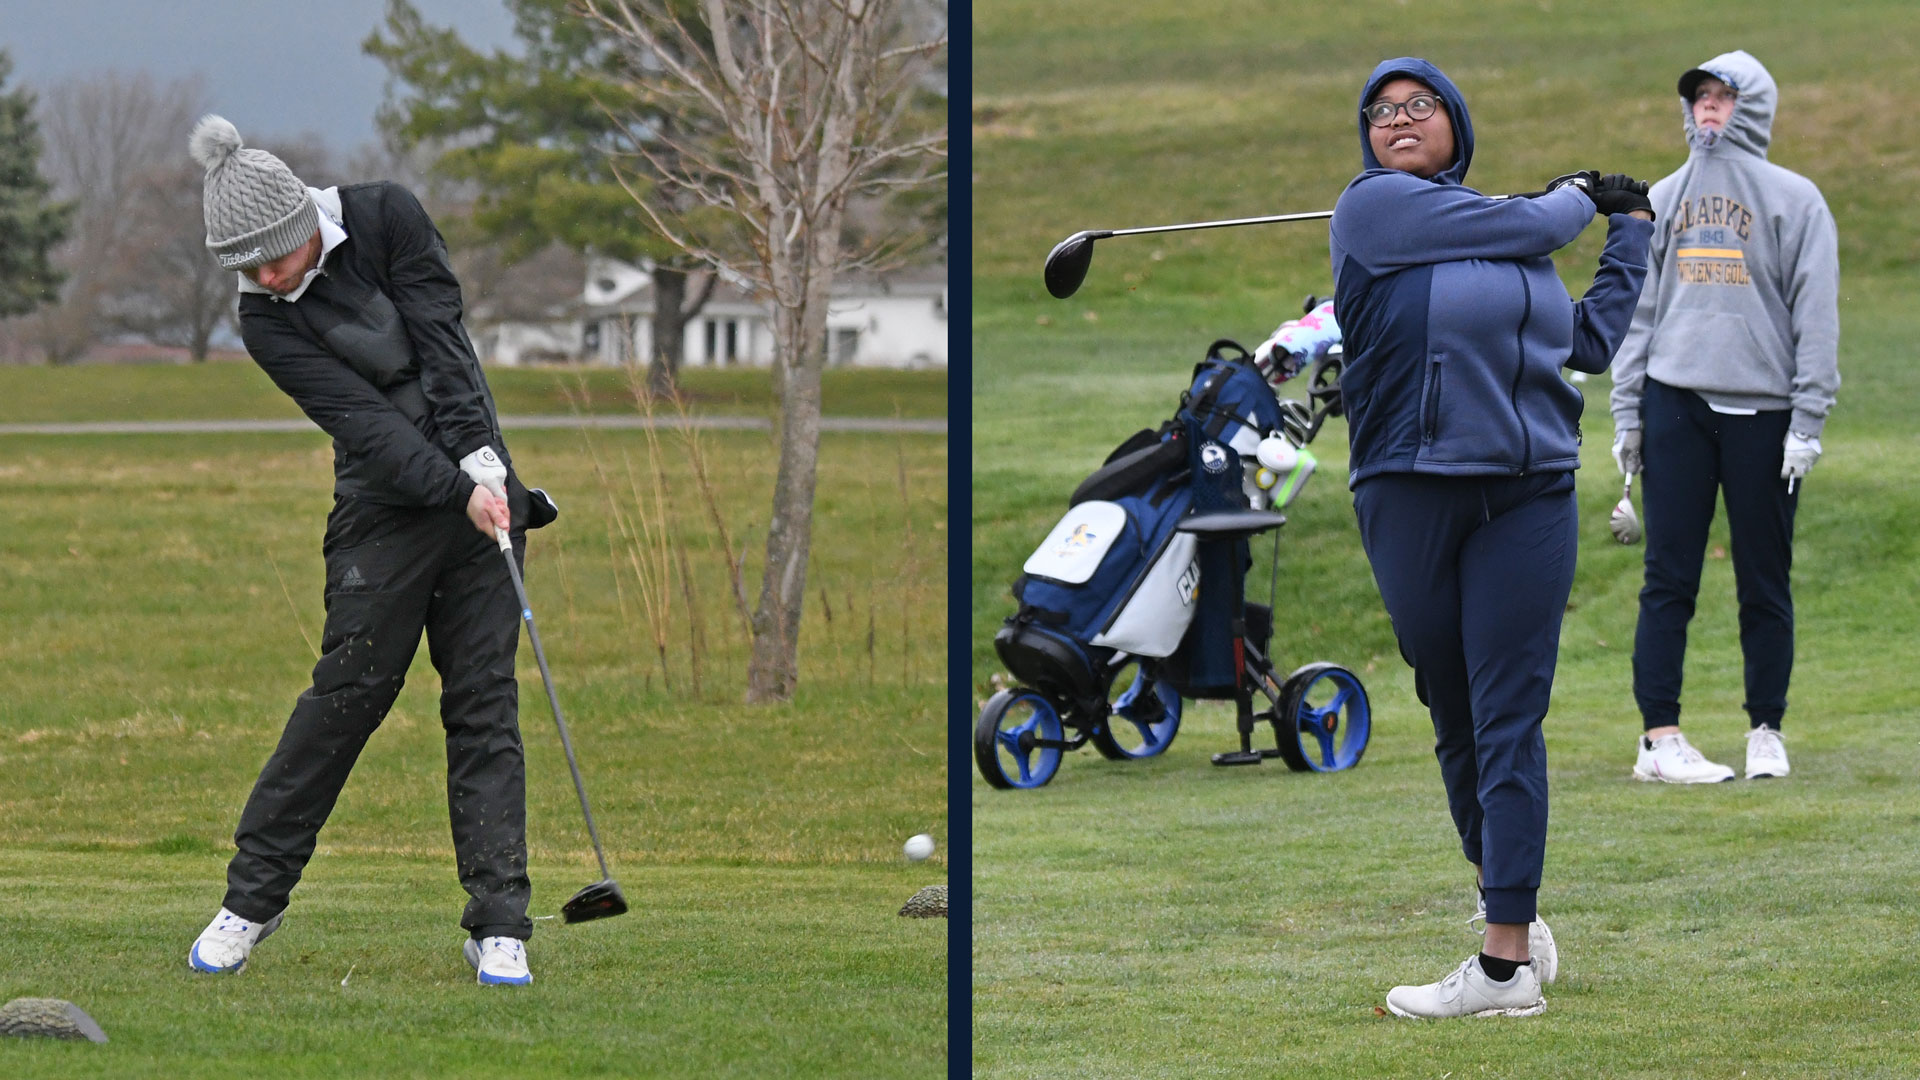 Pride split head-to-head matchup against Loras in match play faceoff